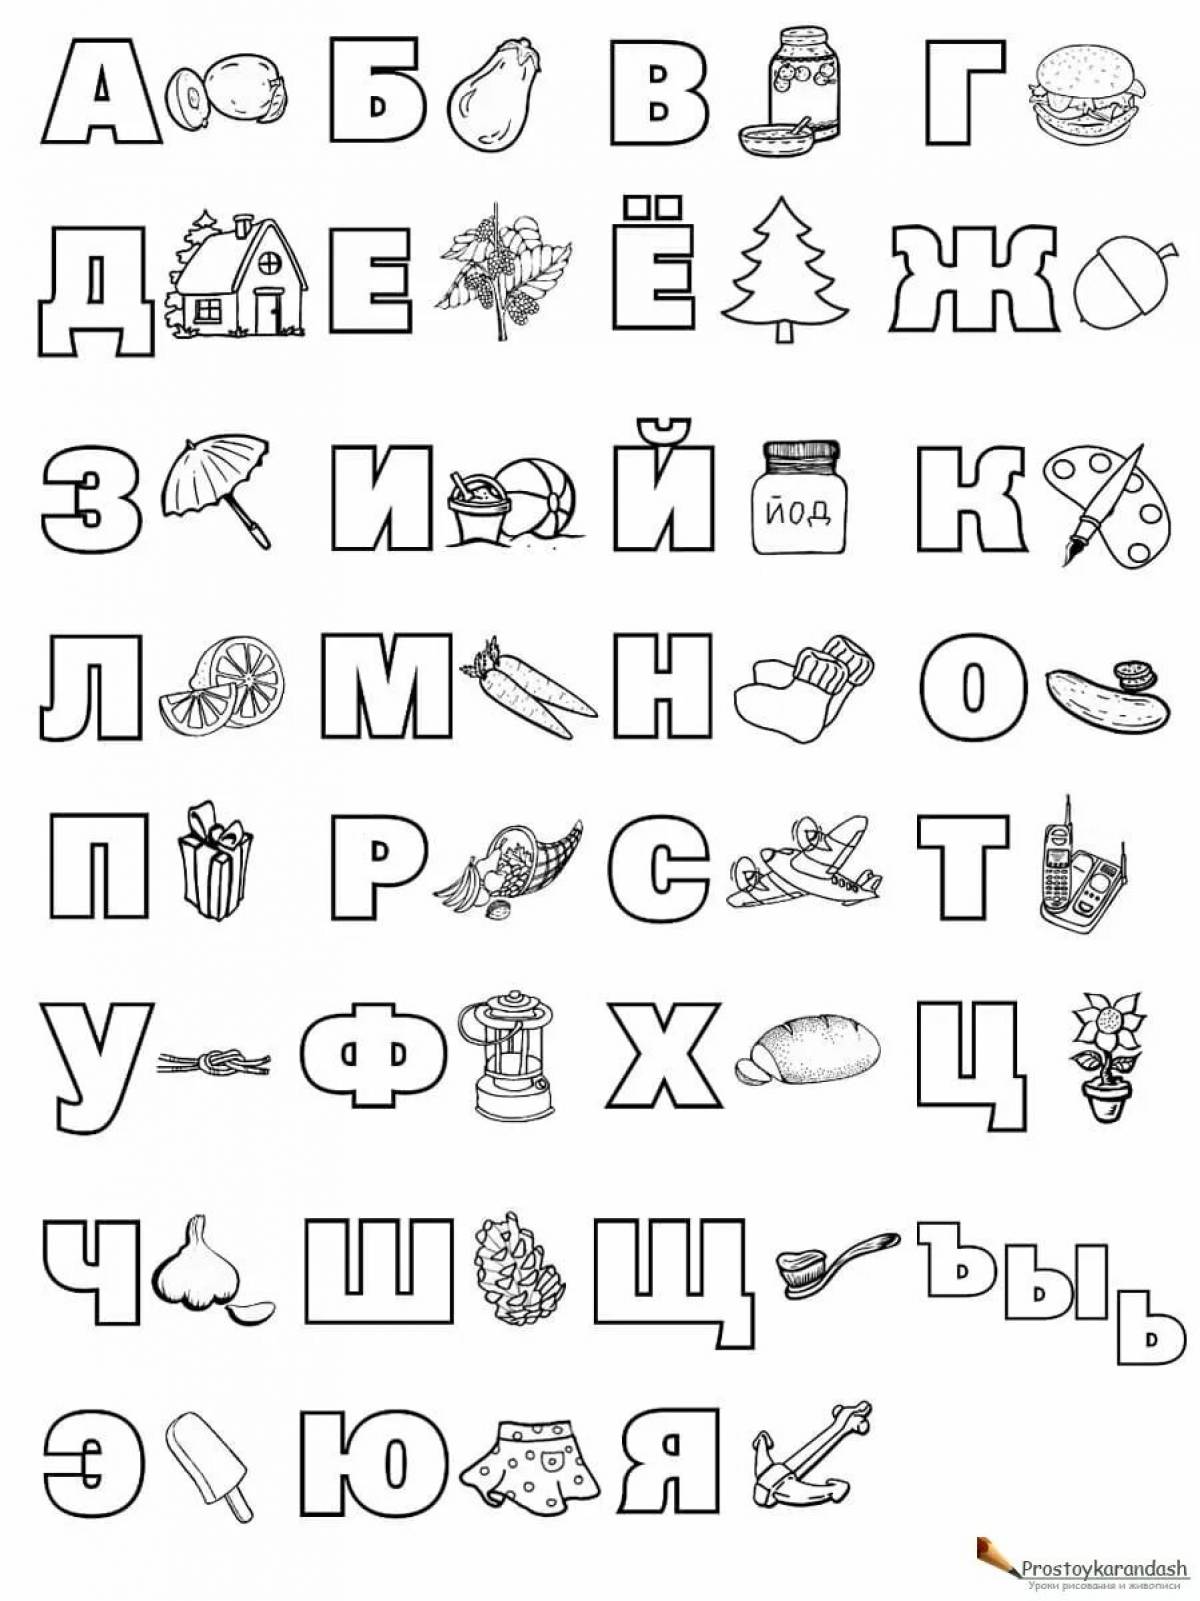 Russian printed alphabet all 33 letters #11